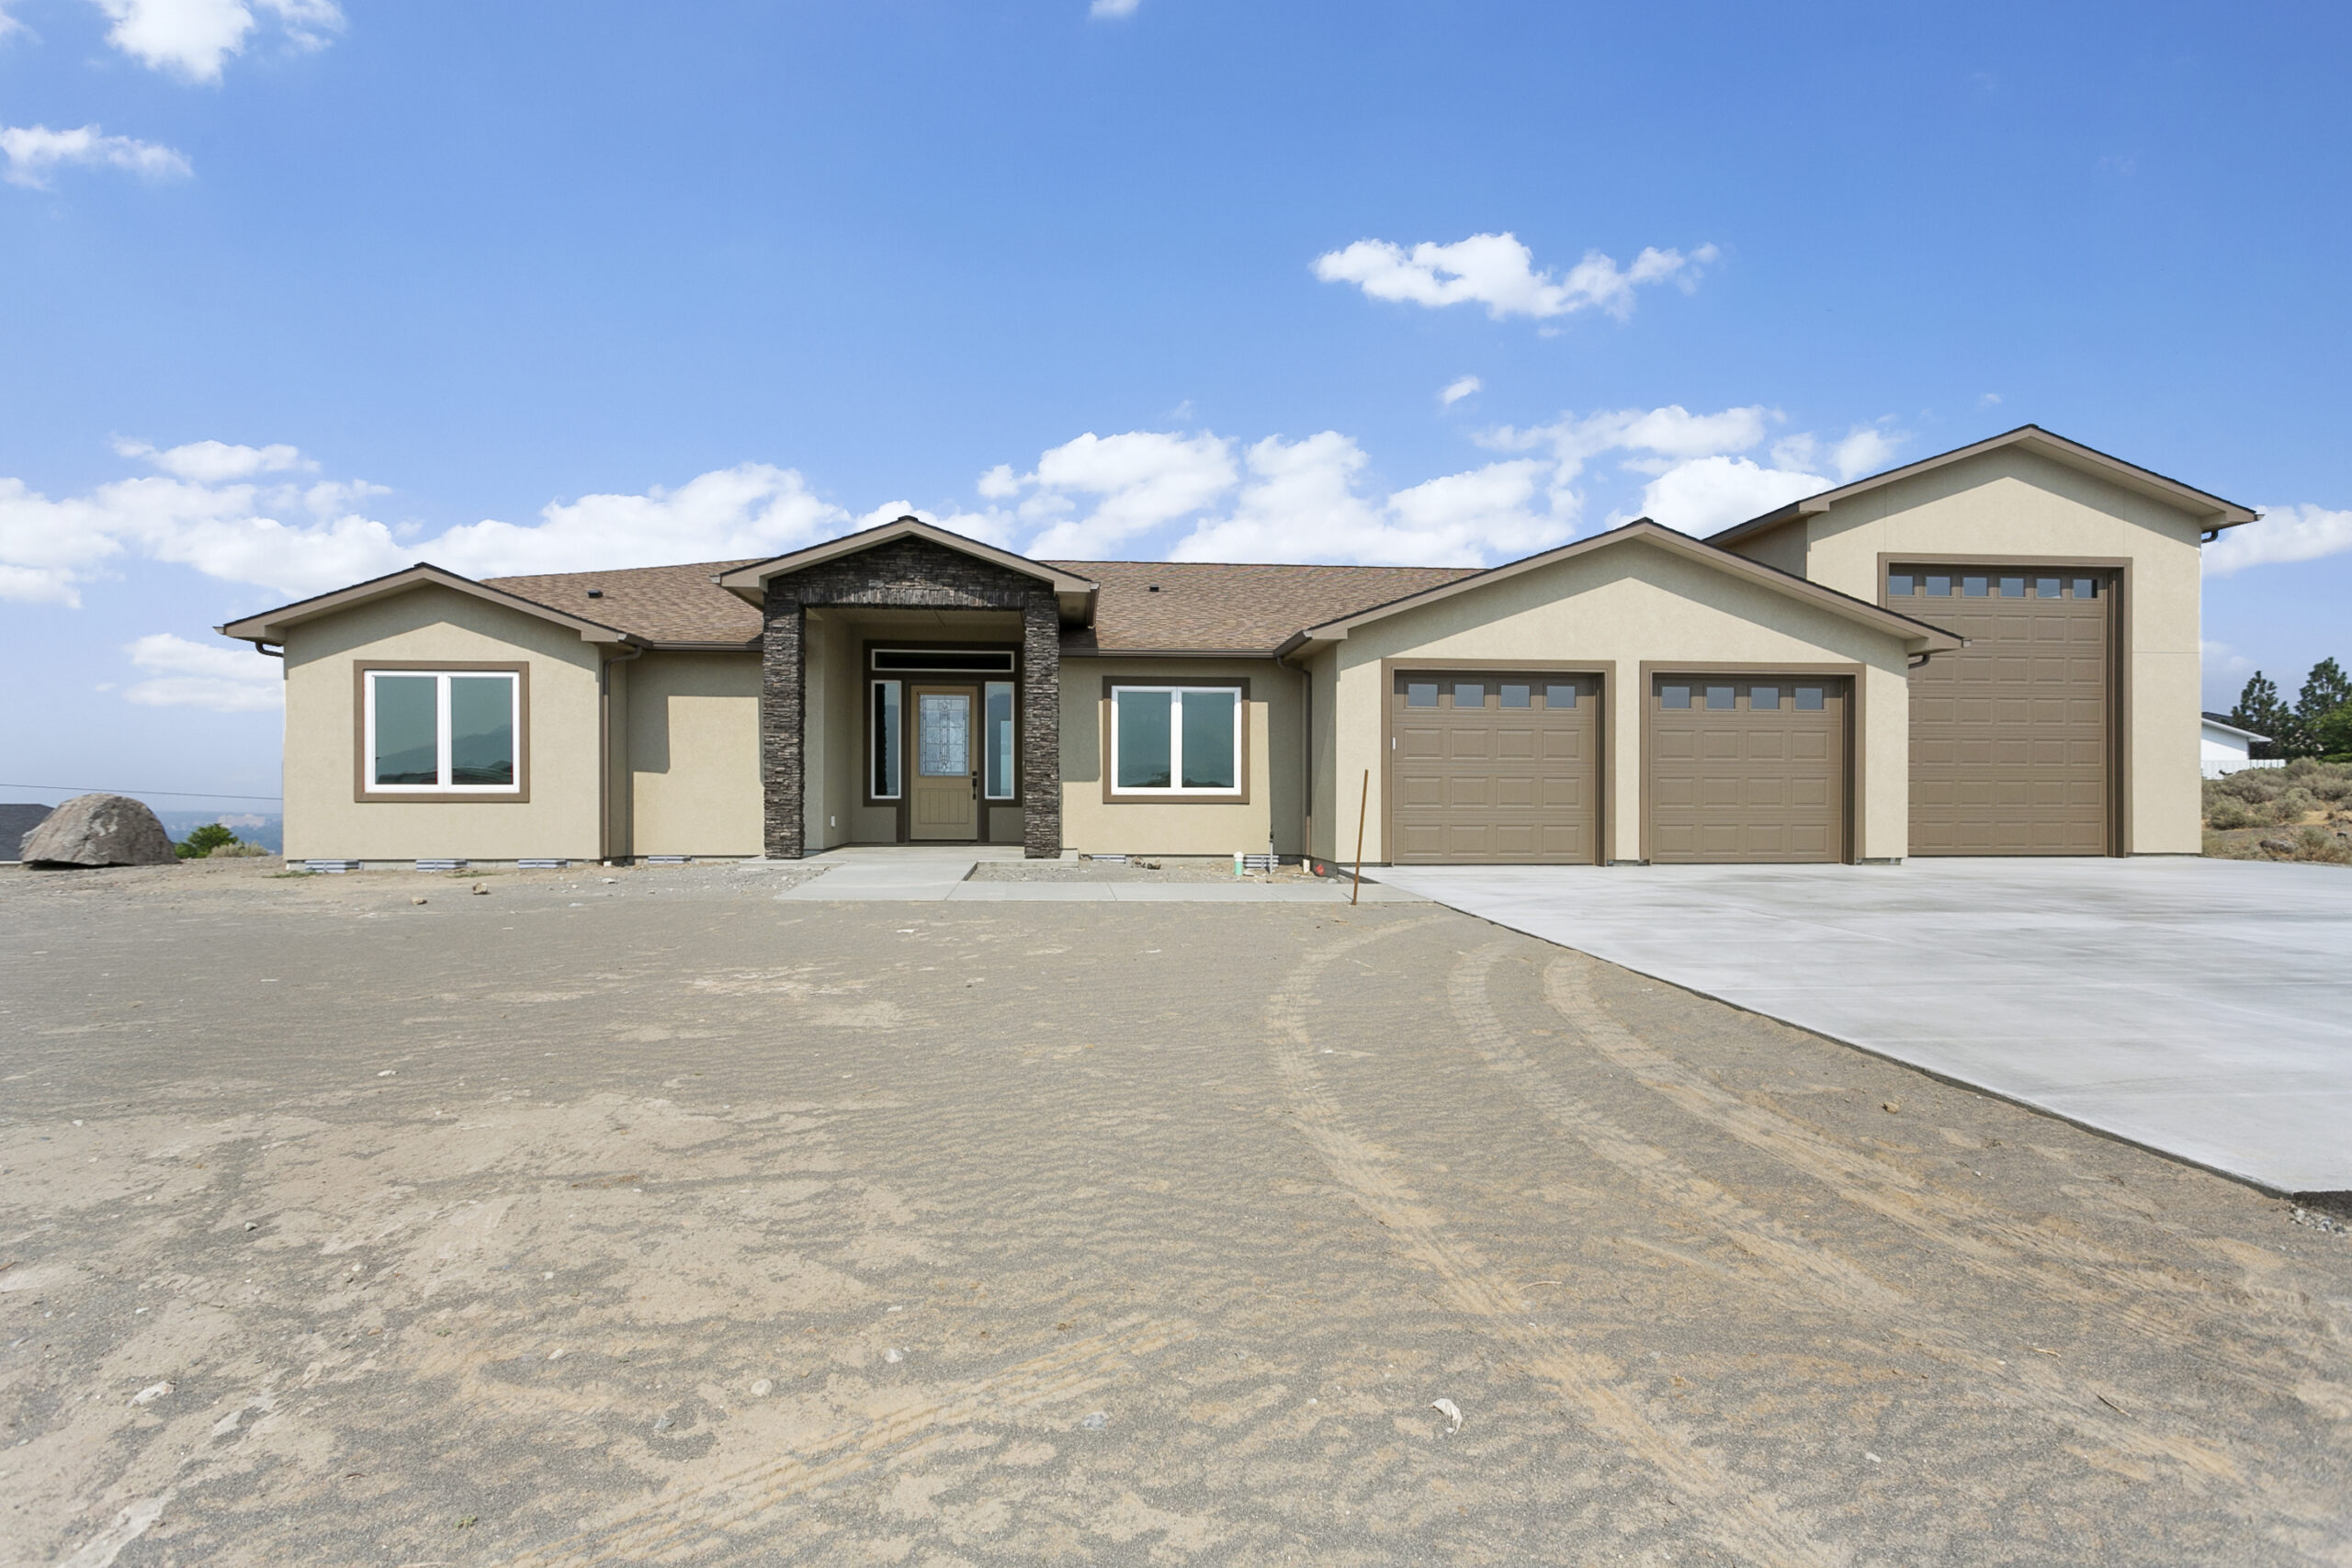 Front view of a modern home with garage, walkway and front yard.